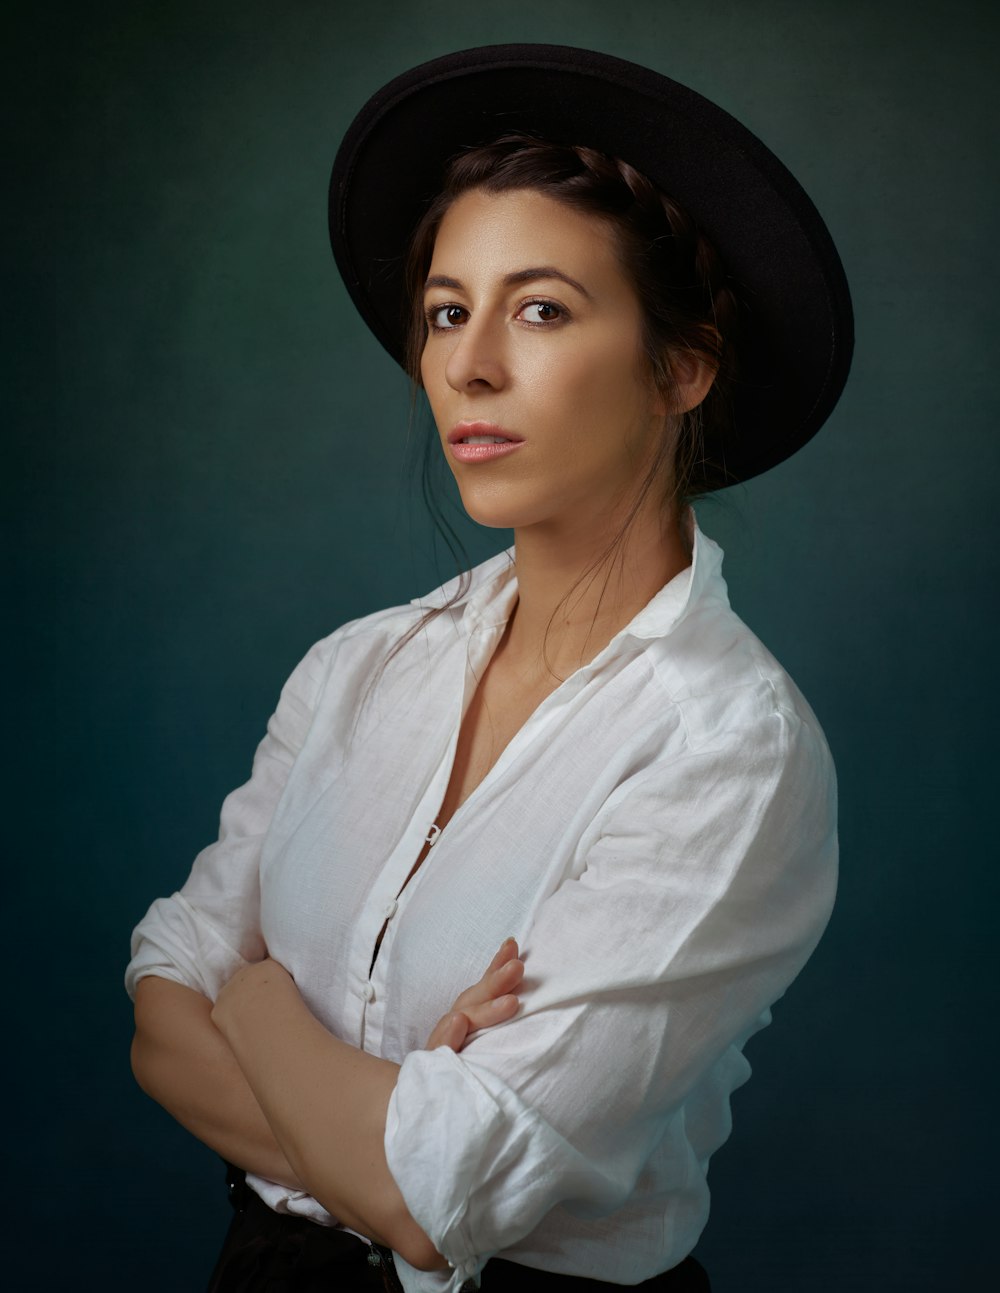 woman in white dress shirt and black fedora hat